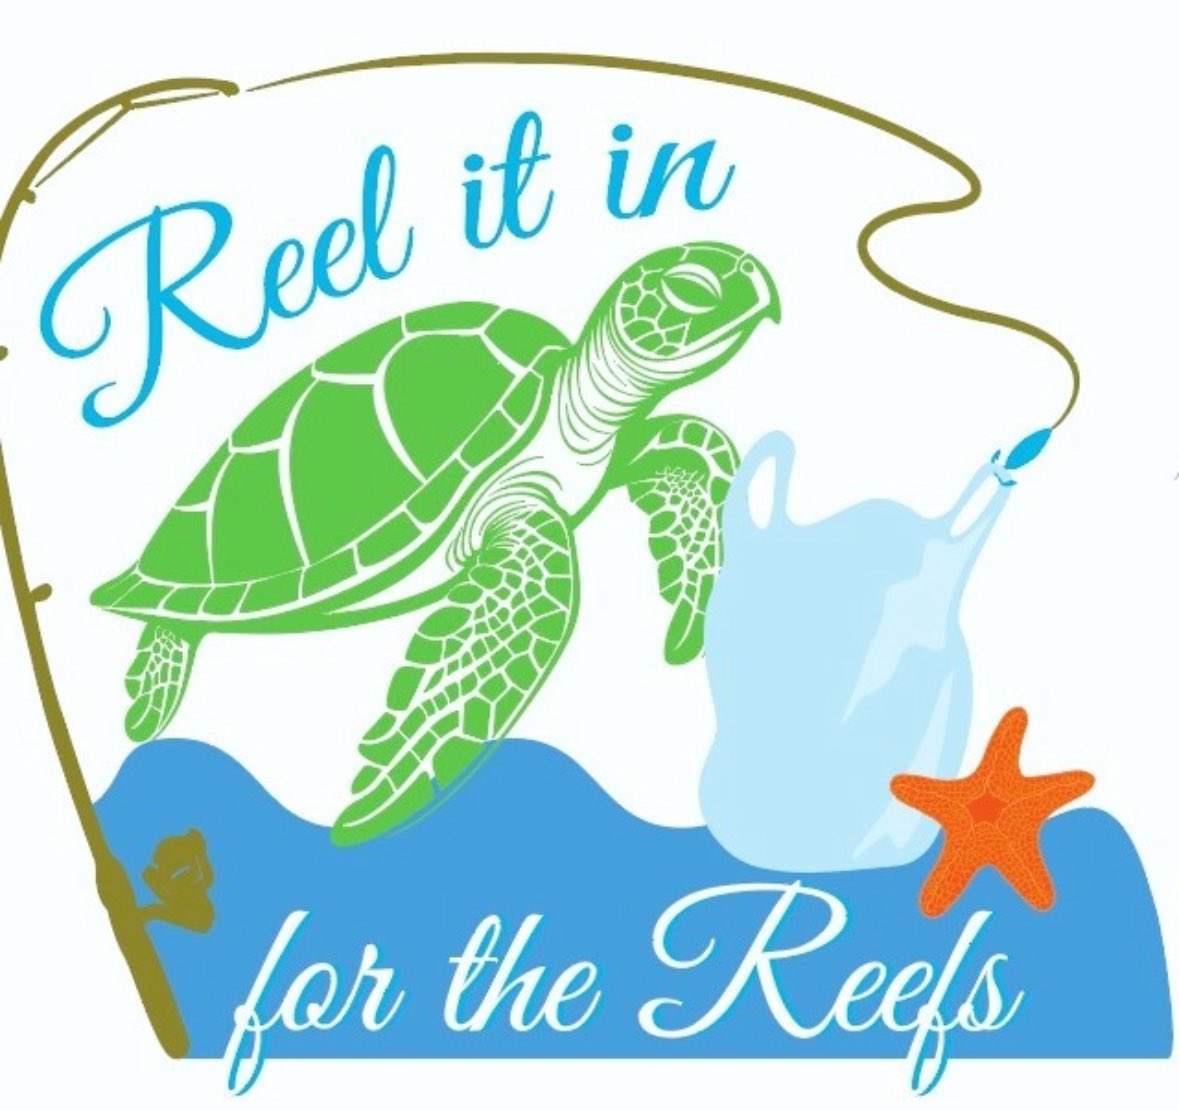 We are proud to sponsor the first Annual “Reel it in for the Reefs” cleanup dive in Palm Beach, Florida, the LARGEST OF IT'S KIND! On April 19th, you can book a FREE trip with one of these participating dive operators to help us clean up the reefs! #savetheseaturtles #reelitin